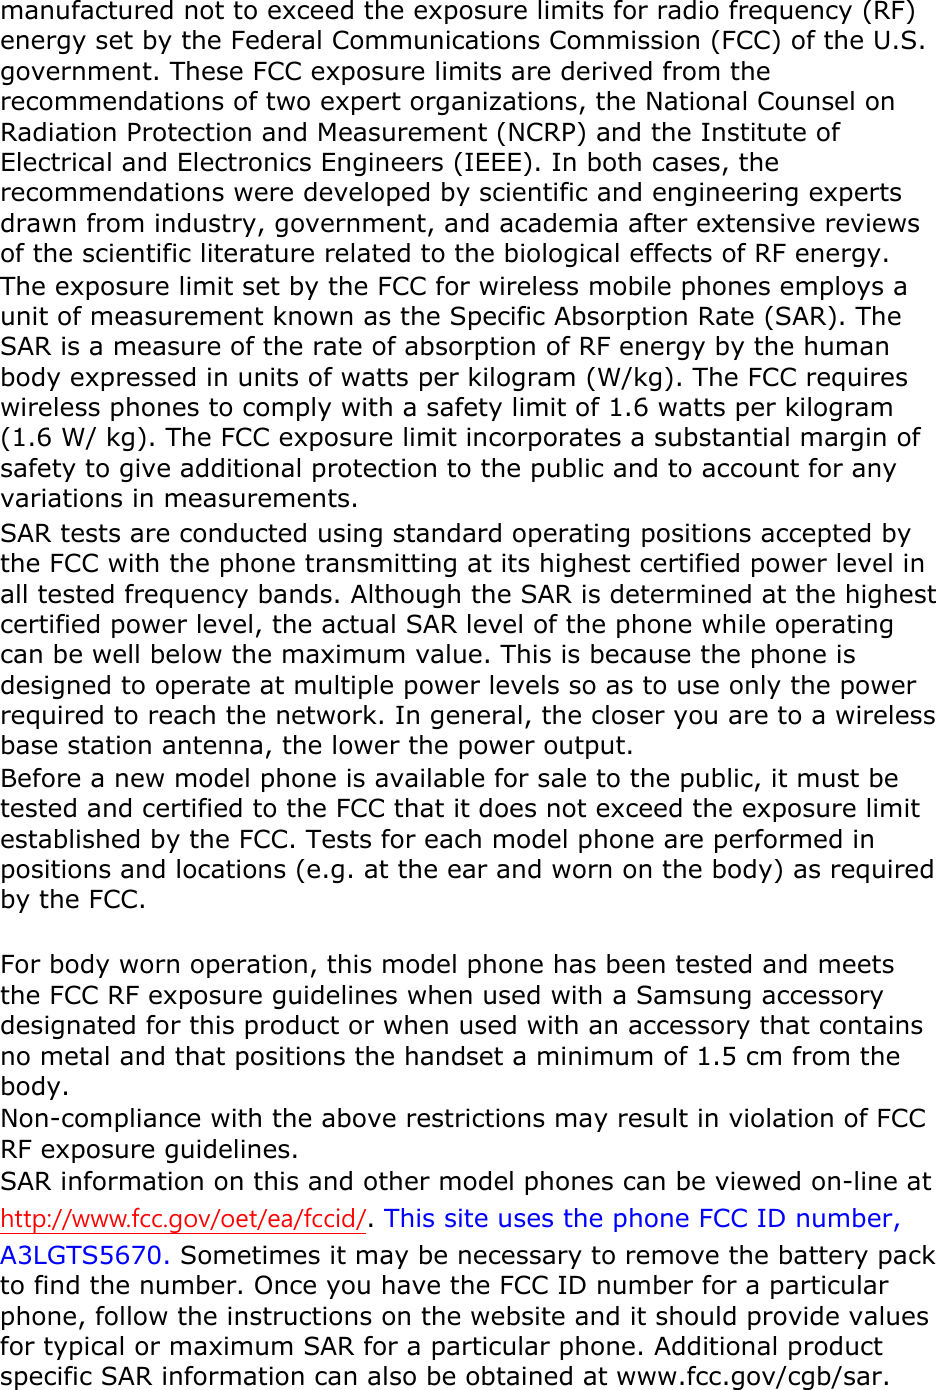 manufactured not to exceed the exposure limits for radio frequency (RF) energy set by the Federal Communications Commission (FCC) of the U.S. government. These FCC exposure limits are derived from the recommendations of two expert organizations, the National Counsel on Radiation Protection and Measurement (NCRP) and the Institute of Electrical and Electronics Engineers (IEEE). In both cases, the recommendations were developed by scientific and engineering experts drawn from industry, government, and academia after extensive reviews of the scientific literature related to the biological effects of RF energy. The exposure limit set by the FCC for wireless mobile phones employs a unit of measurement known as the Specific Absorption Rate (SAR). The SAR is a measure of the rate of absorption of RF energy by the human body expressed in units of watts per kilogram (W/kg). The FCC requires wireless phones to comply with a safety limit of 1.6 watts per kilogram (1.6 W/ kg). The FCC exposure limit incorporates a substantial margin of safety to give additional protection to the public and to account for any variations in measurements. SAR tests are conducted using standard operating positions accepted by the FCC with the phone transmitting at its highest certified power level in all tested frequency bands. Although the SAR is determined at the highest certified power level, the actual SAR level of the phone while operating can be well below the maximum value. This is because the phone is designed to operate at multiple power levels so as to use only the power required to reach the network. In general, the closer you are to a wireless base station antenna, the lower the power output. Before a new model phone is available for sale to the public, it must be tested and certified to the FCC that it does not exceed the exposure limit established by the FCC. Tests for each model phone are performed in positions and locations (e.g. at the ear and worn on the body) as required by the FCC.      For body worn operation, this model phone has been tested and meets the FCC RF exposure guidelines when used with a Samsung accessory designated for this product or when used with an accessory that contains no metal and that positions the handset a minimum of 1.5 cm from the body.  Non-compliance with the above restrictions may result in violation of FCC RF exposure guidelines. SAR information on this and other model phones can be viewed on-line at http://www.fcc.gov/oet/ea/fccid/. This site uses the phone FCC ID number, A3LGTS5670. Sometimes it may be necessary to remove the battery pack to find the number. Once you have the FCC ID number for a particular phone, follow the instructions on the website and it should provide values for typical or maximum SAR for a particular phone. Additional product specific SAR information can also be obtained at www.fcc.gov/cgb/sar. 